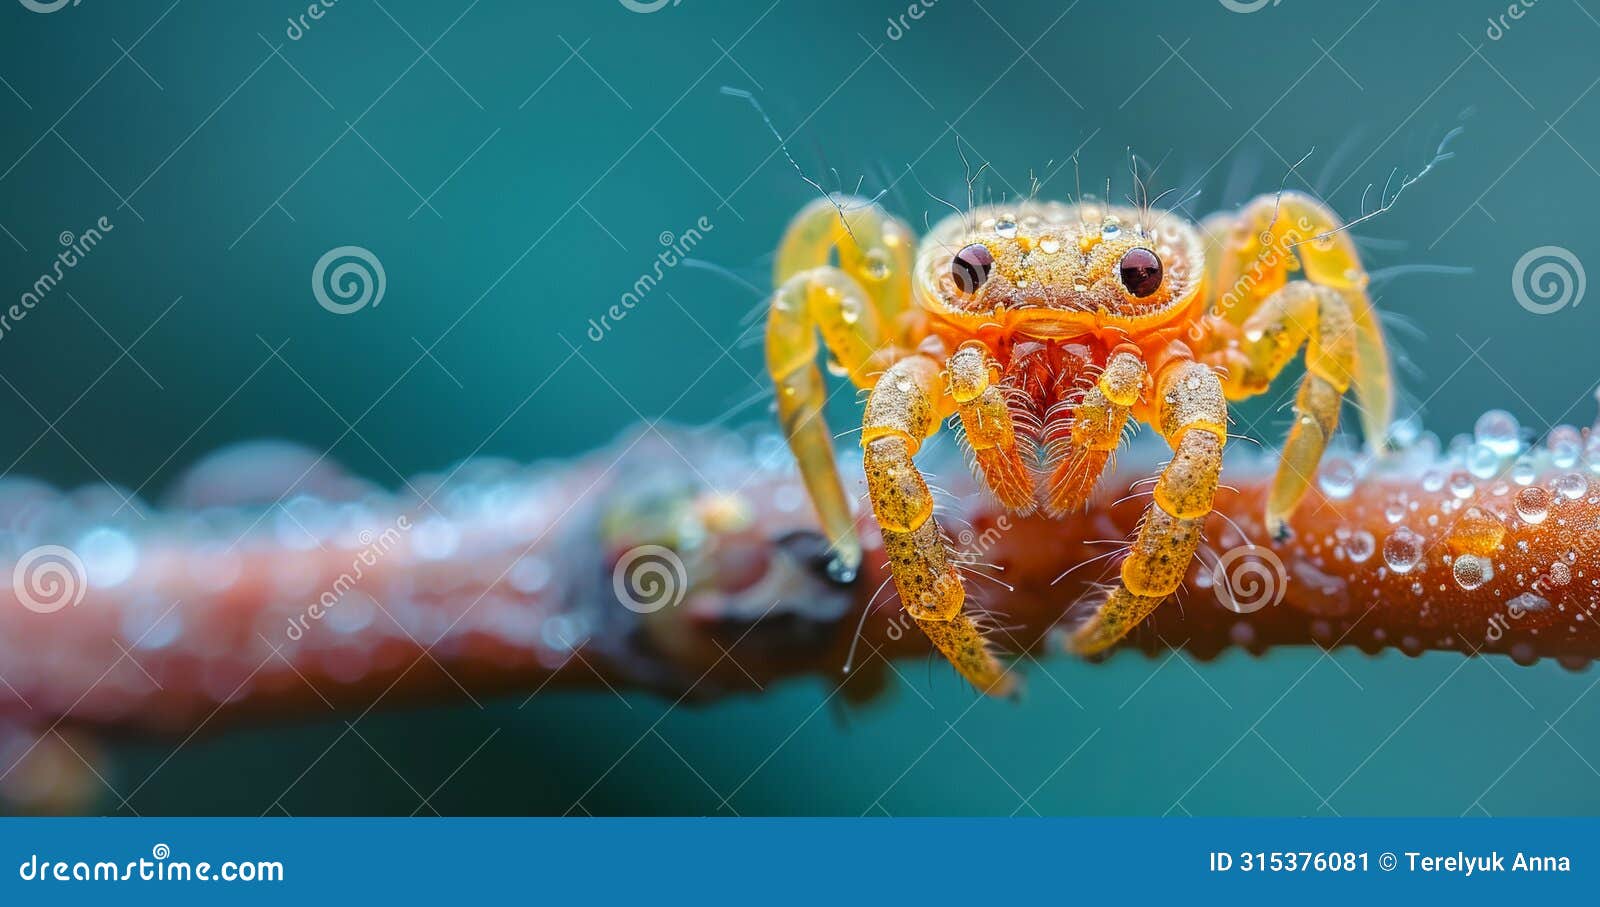 jumping spider is type of arachnid that is commonly found